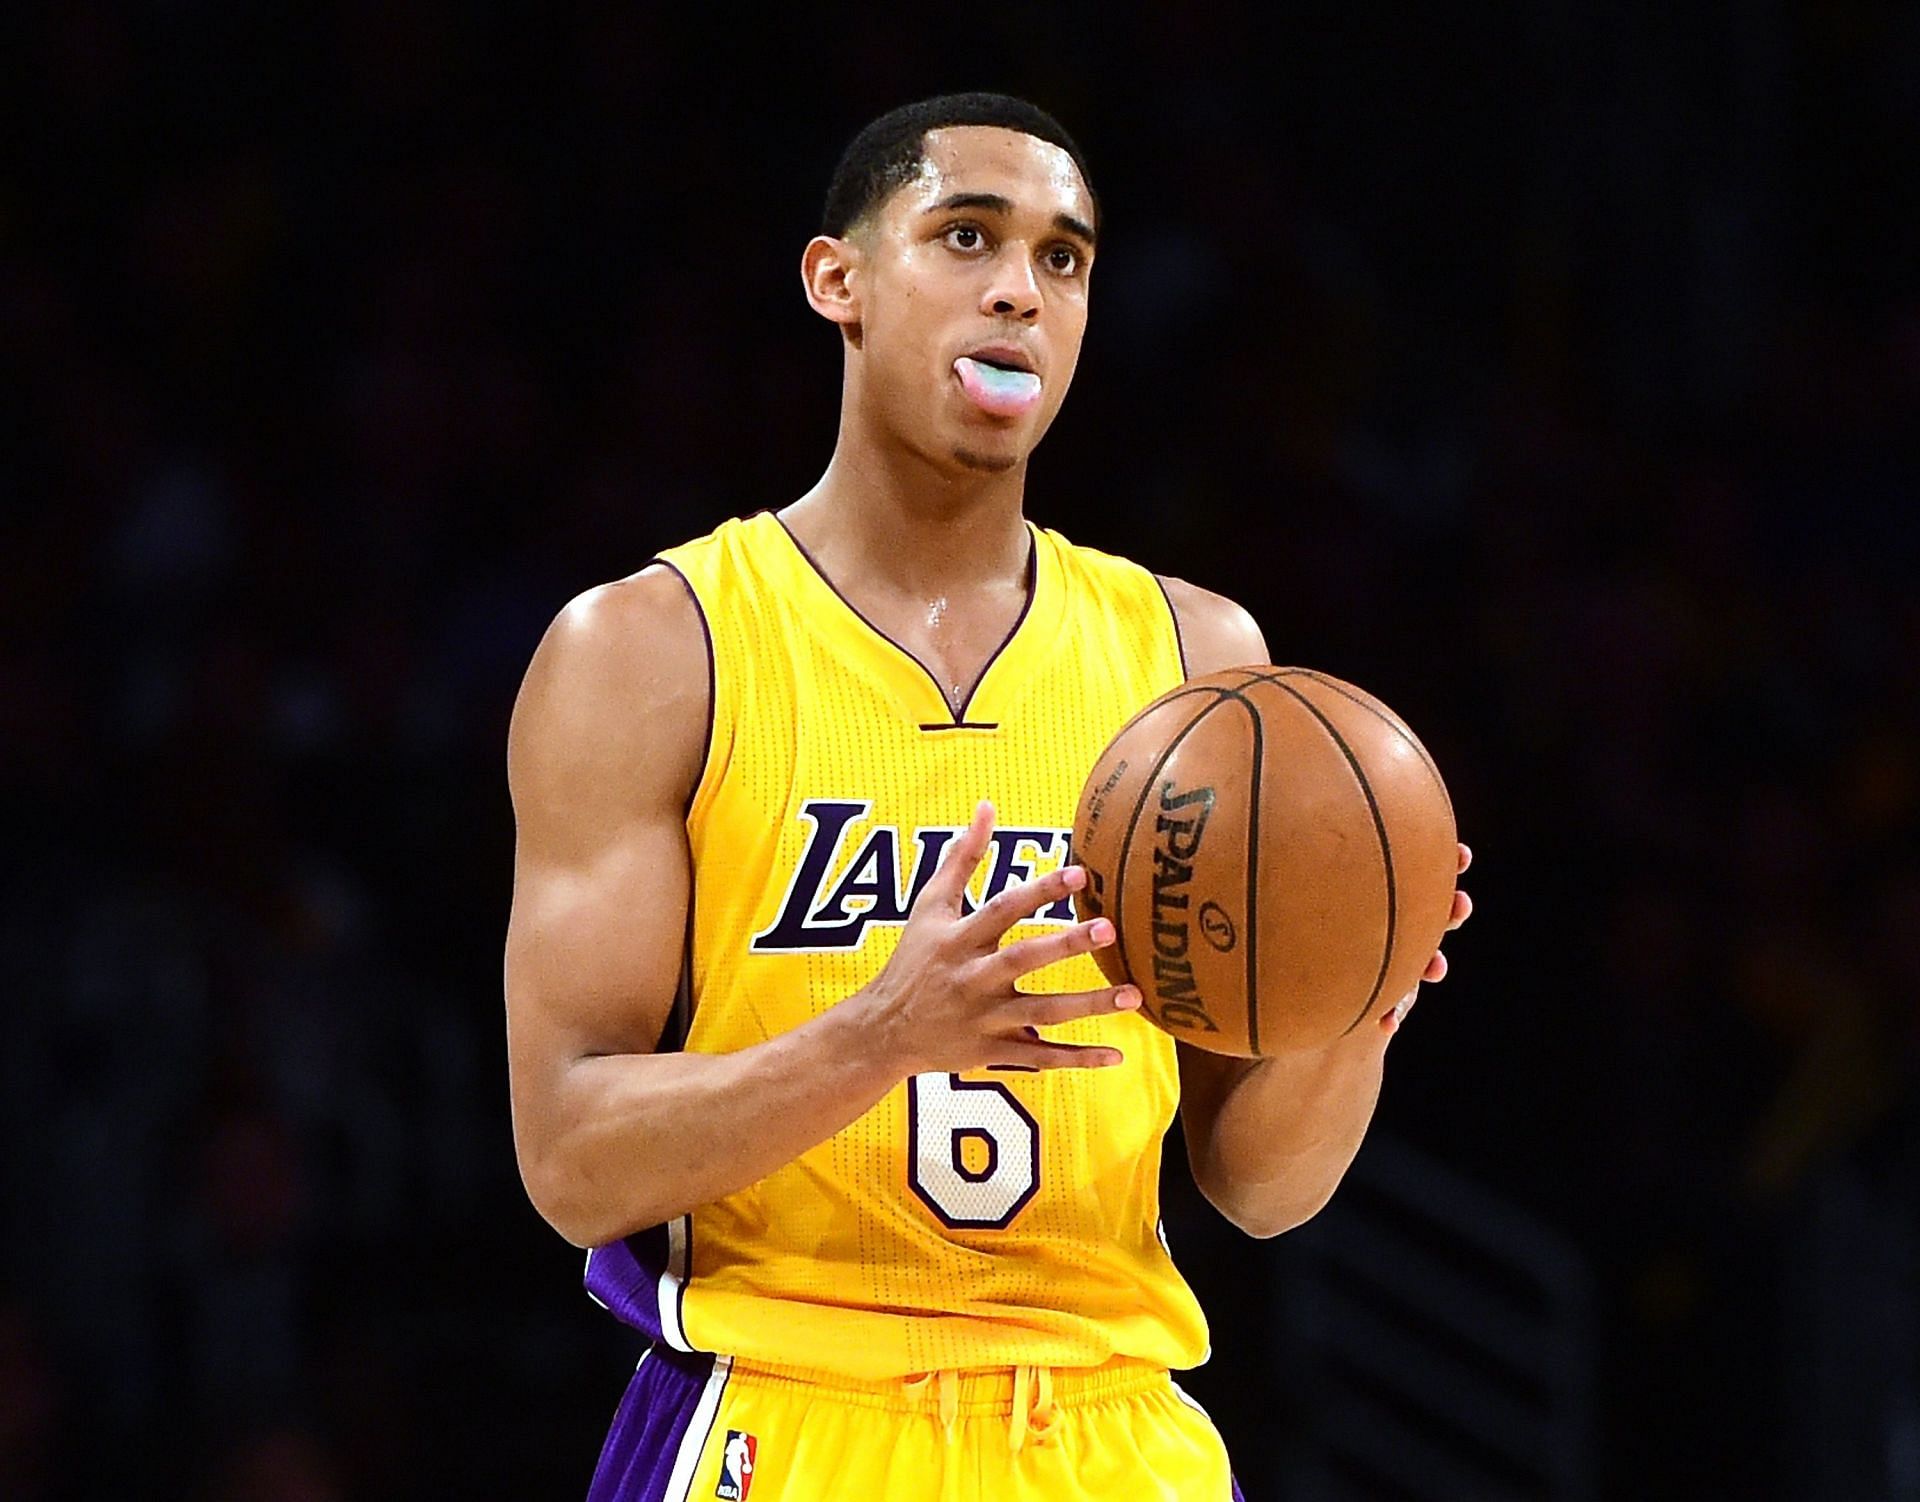 Jordan Clarkson started his NBA career with the LA Lakers.